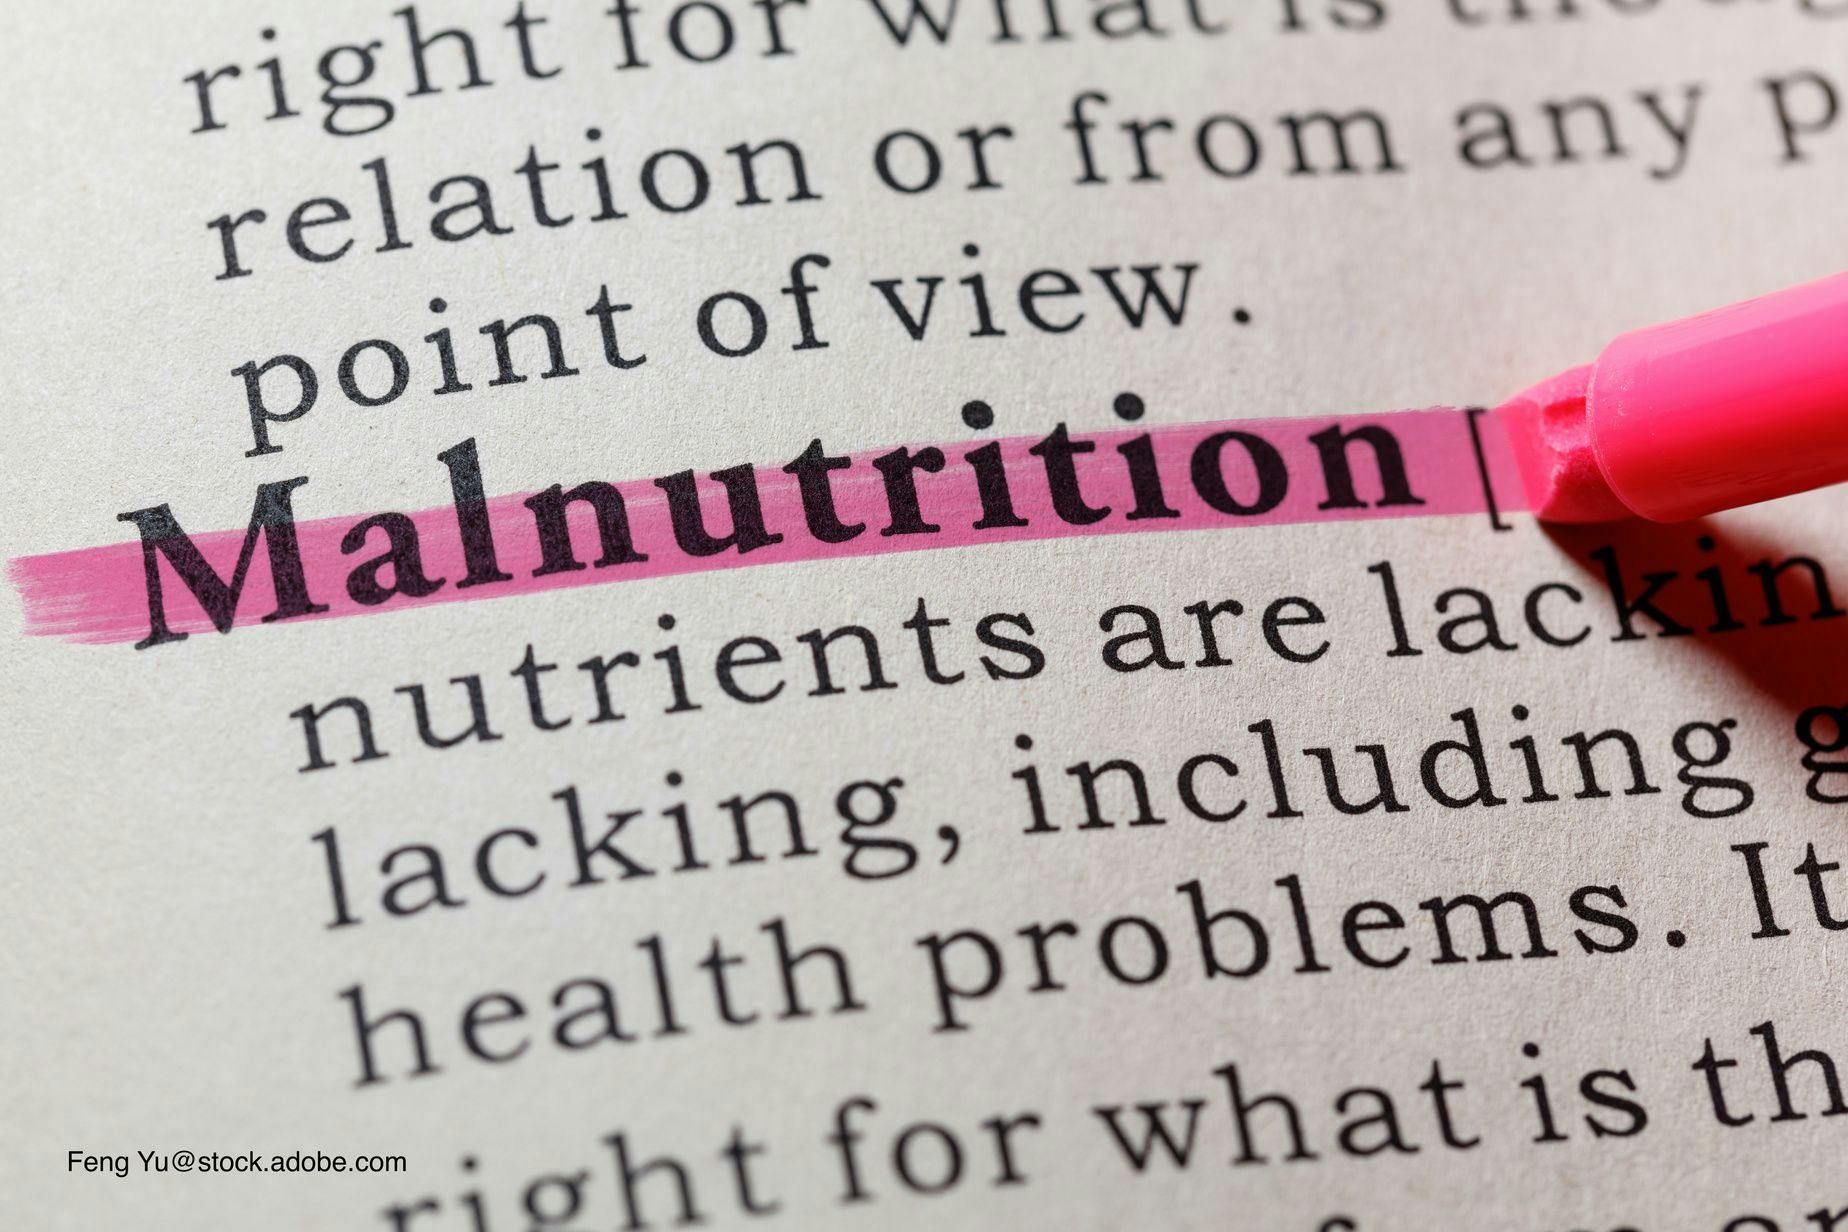 Malnutrition signs aren’t limited to the scale